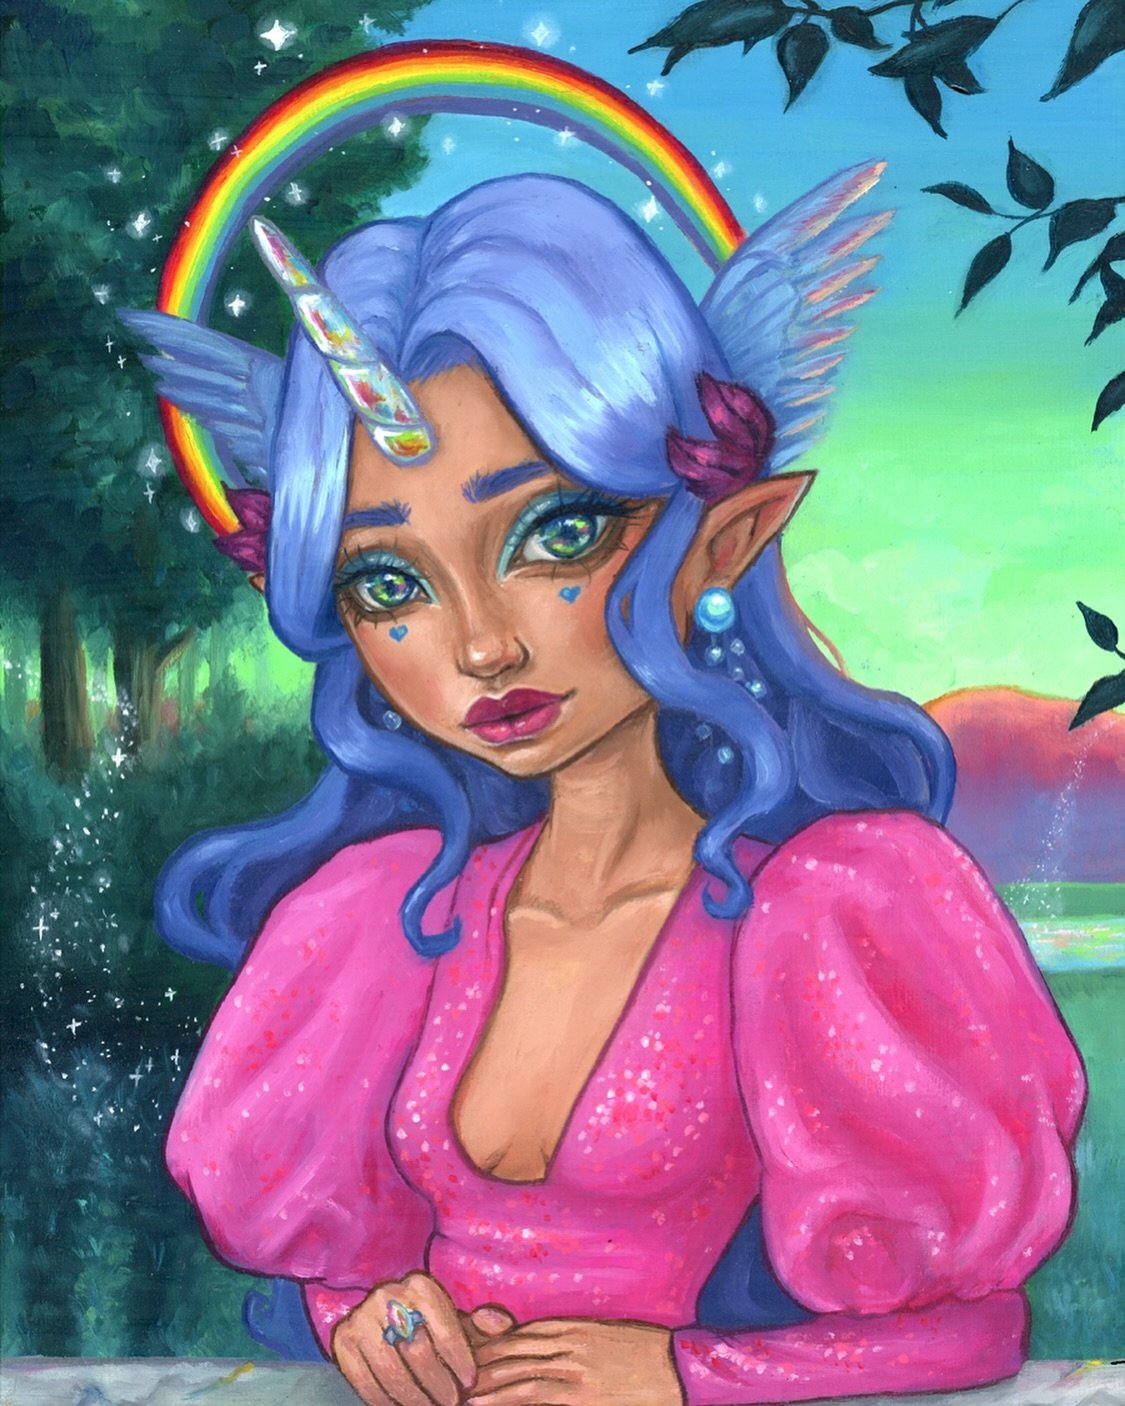 🦄🌈 Happy International Unicorn Day! 

I think it&rsquo;s time to paint another unicorn girl and this time, I want to go over the top with details. 

Saw the total solar eclipse yesterday! A truly awesome experience! Definitely feeling inspired to d